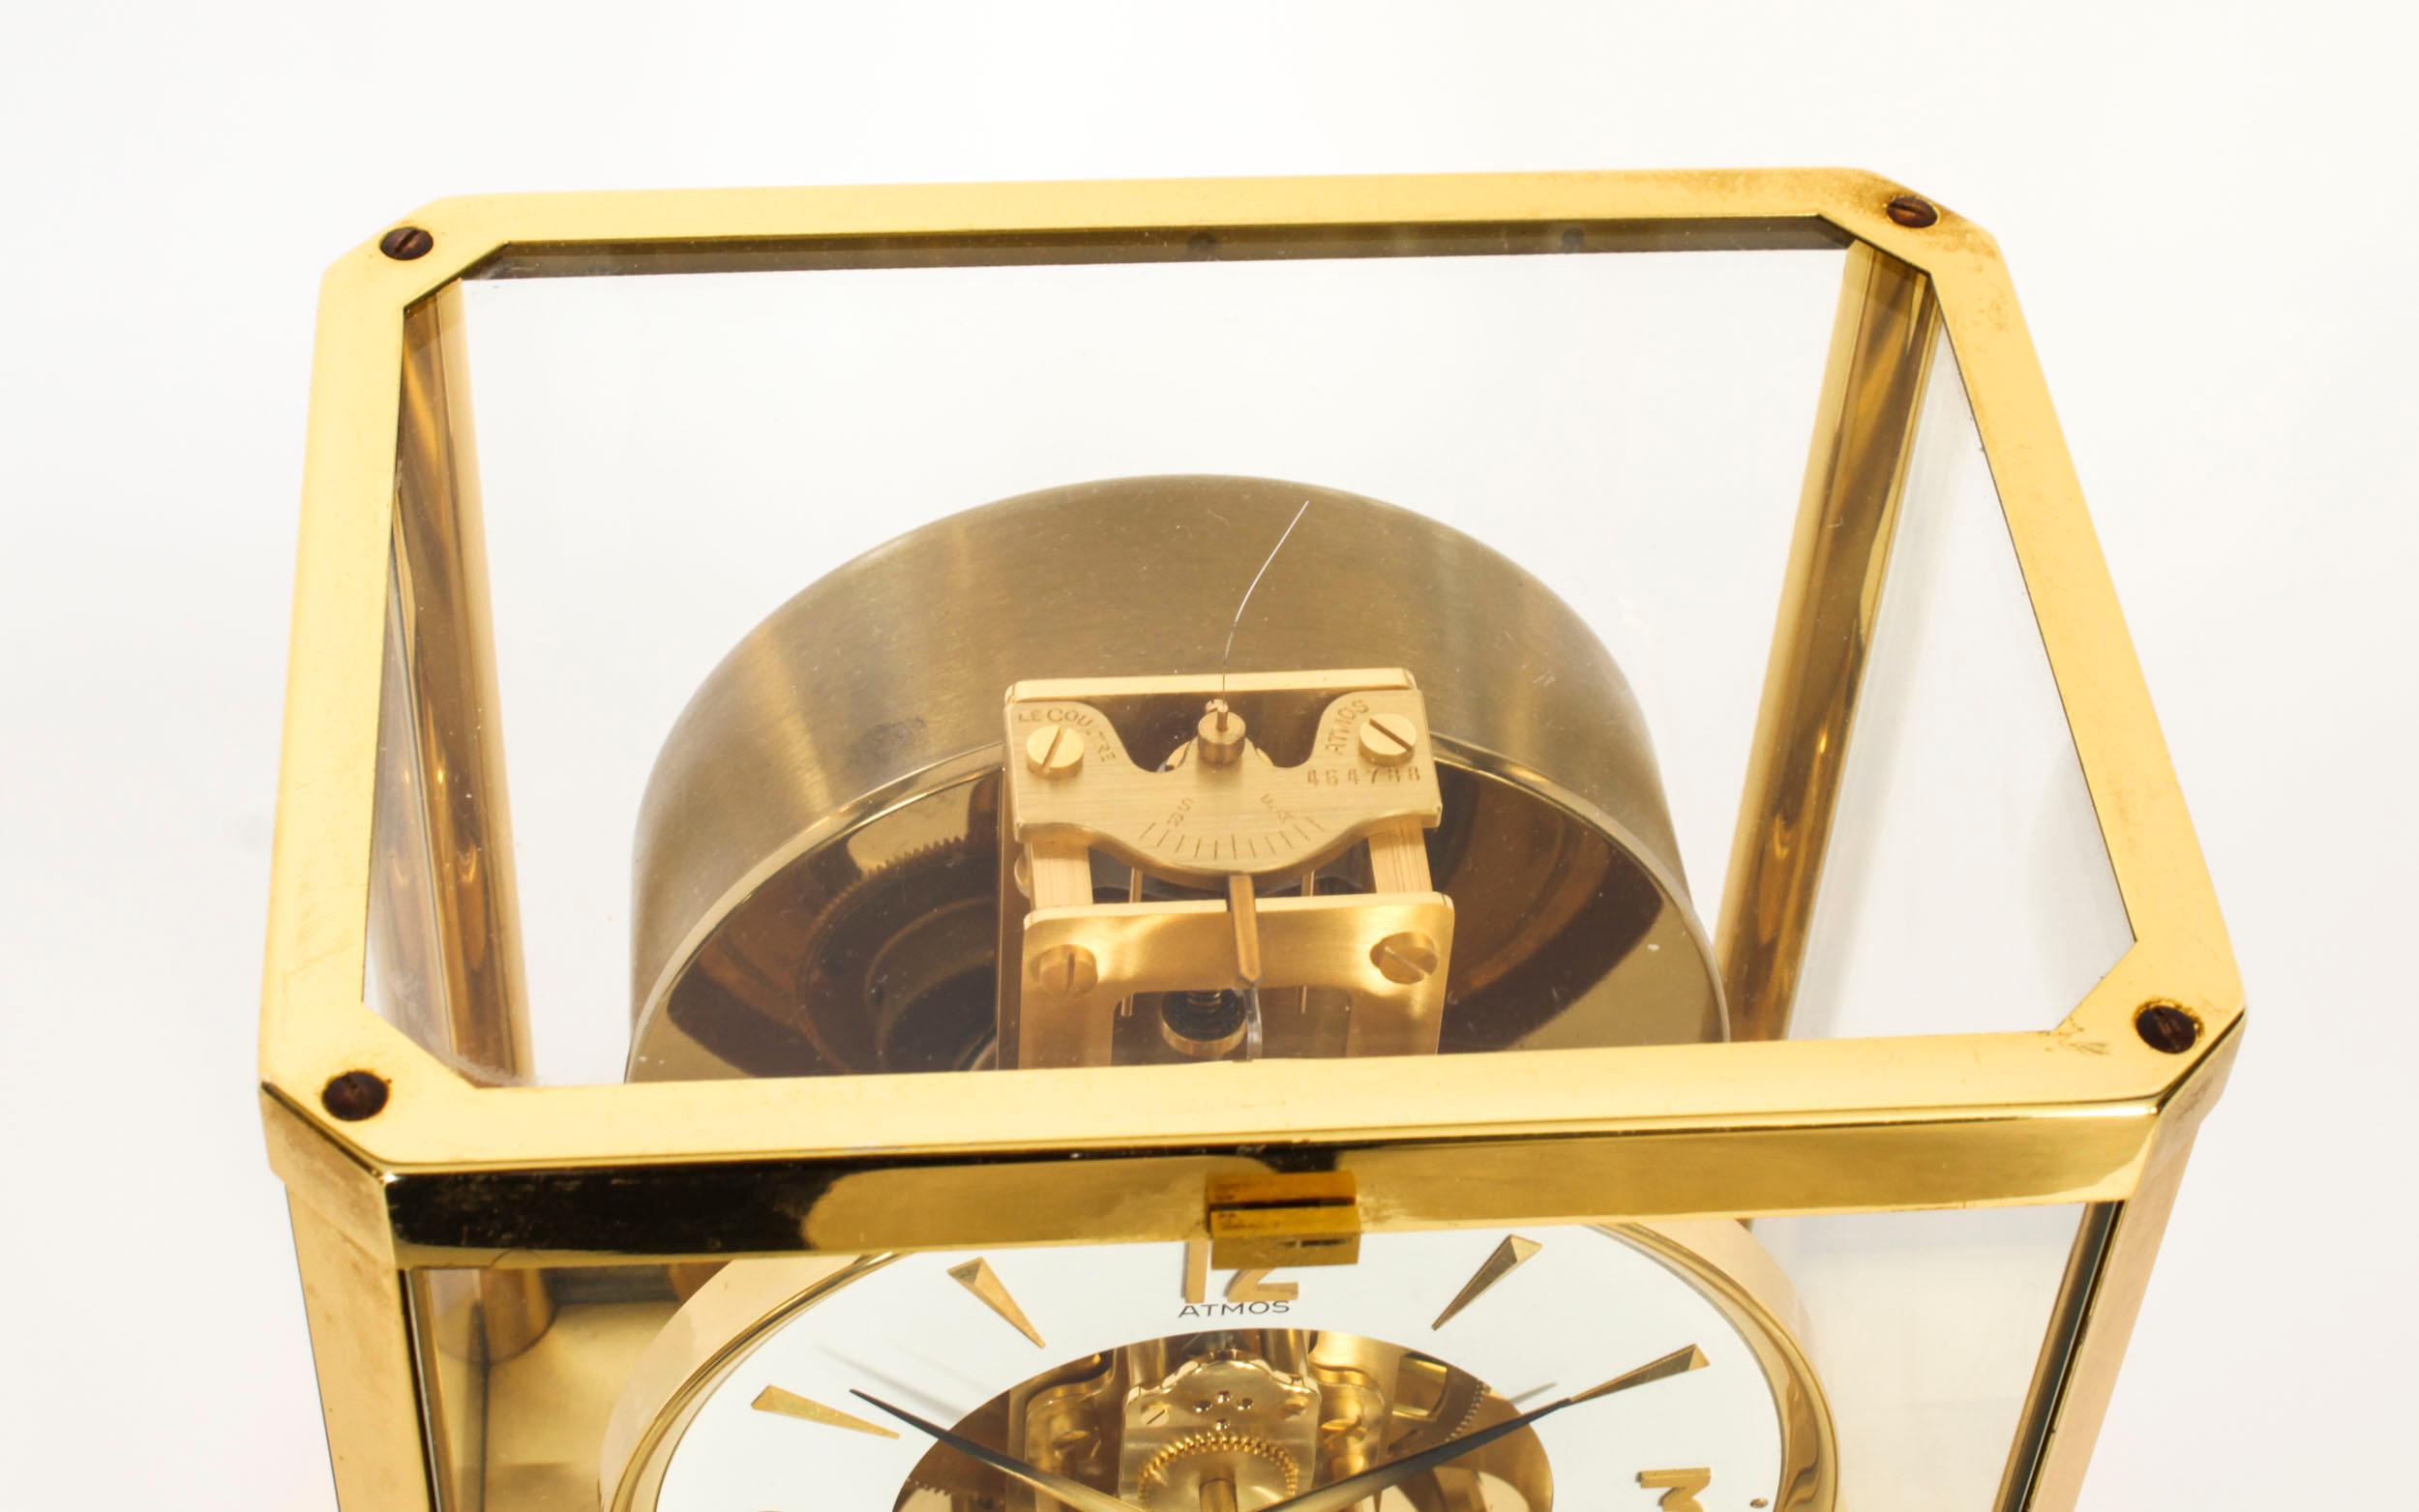 Vintage Atmos Jaeger le Coultre Mantle Clock C1970 20th Century In Good Condition For Sale In London, GB